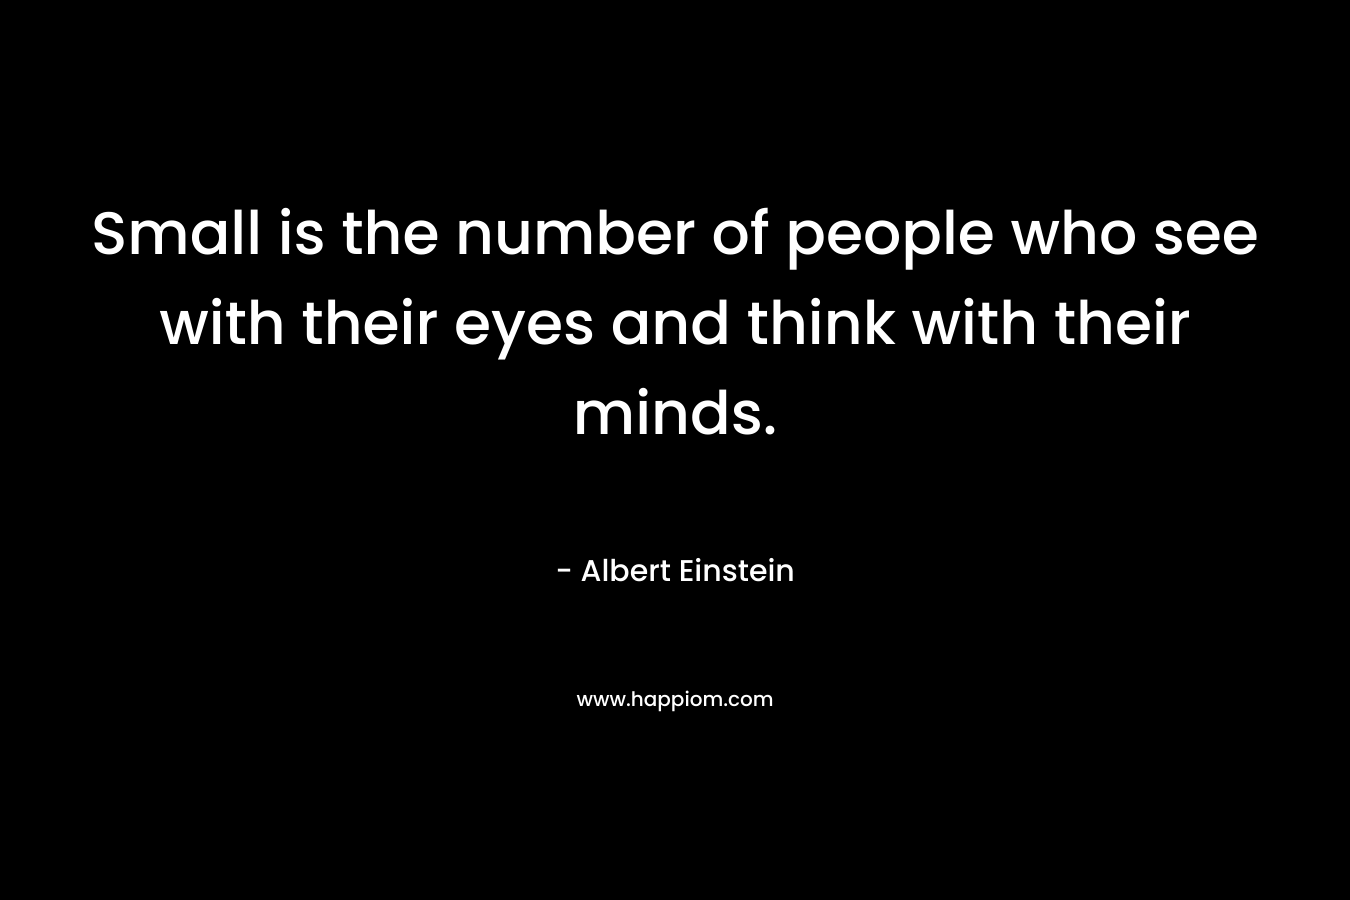 Small is the number of people who see with their eyes and think with their minds. – Albert Einstein